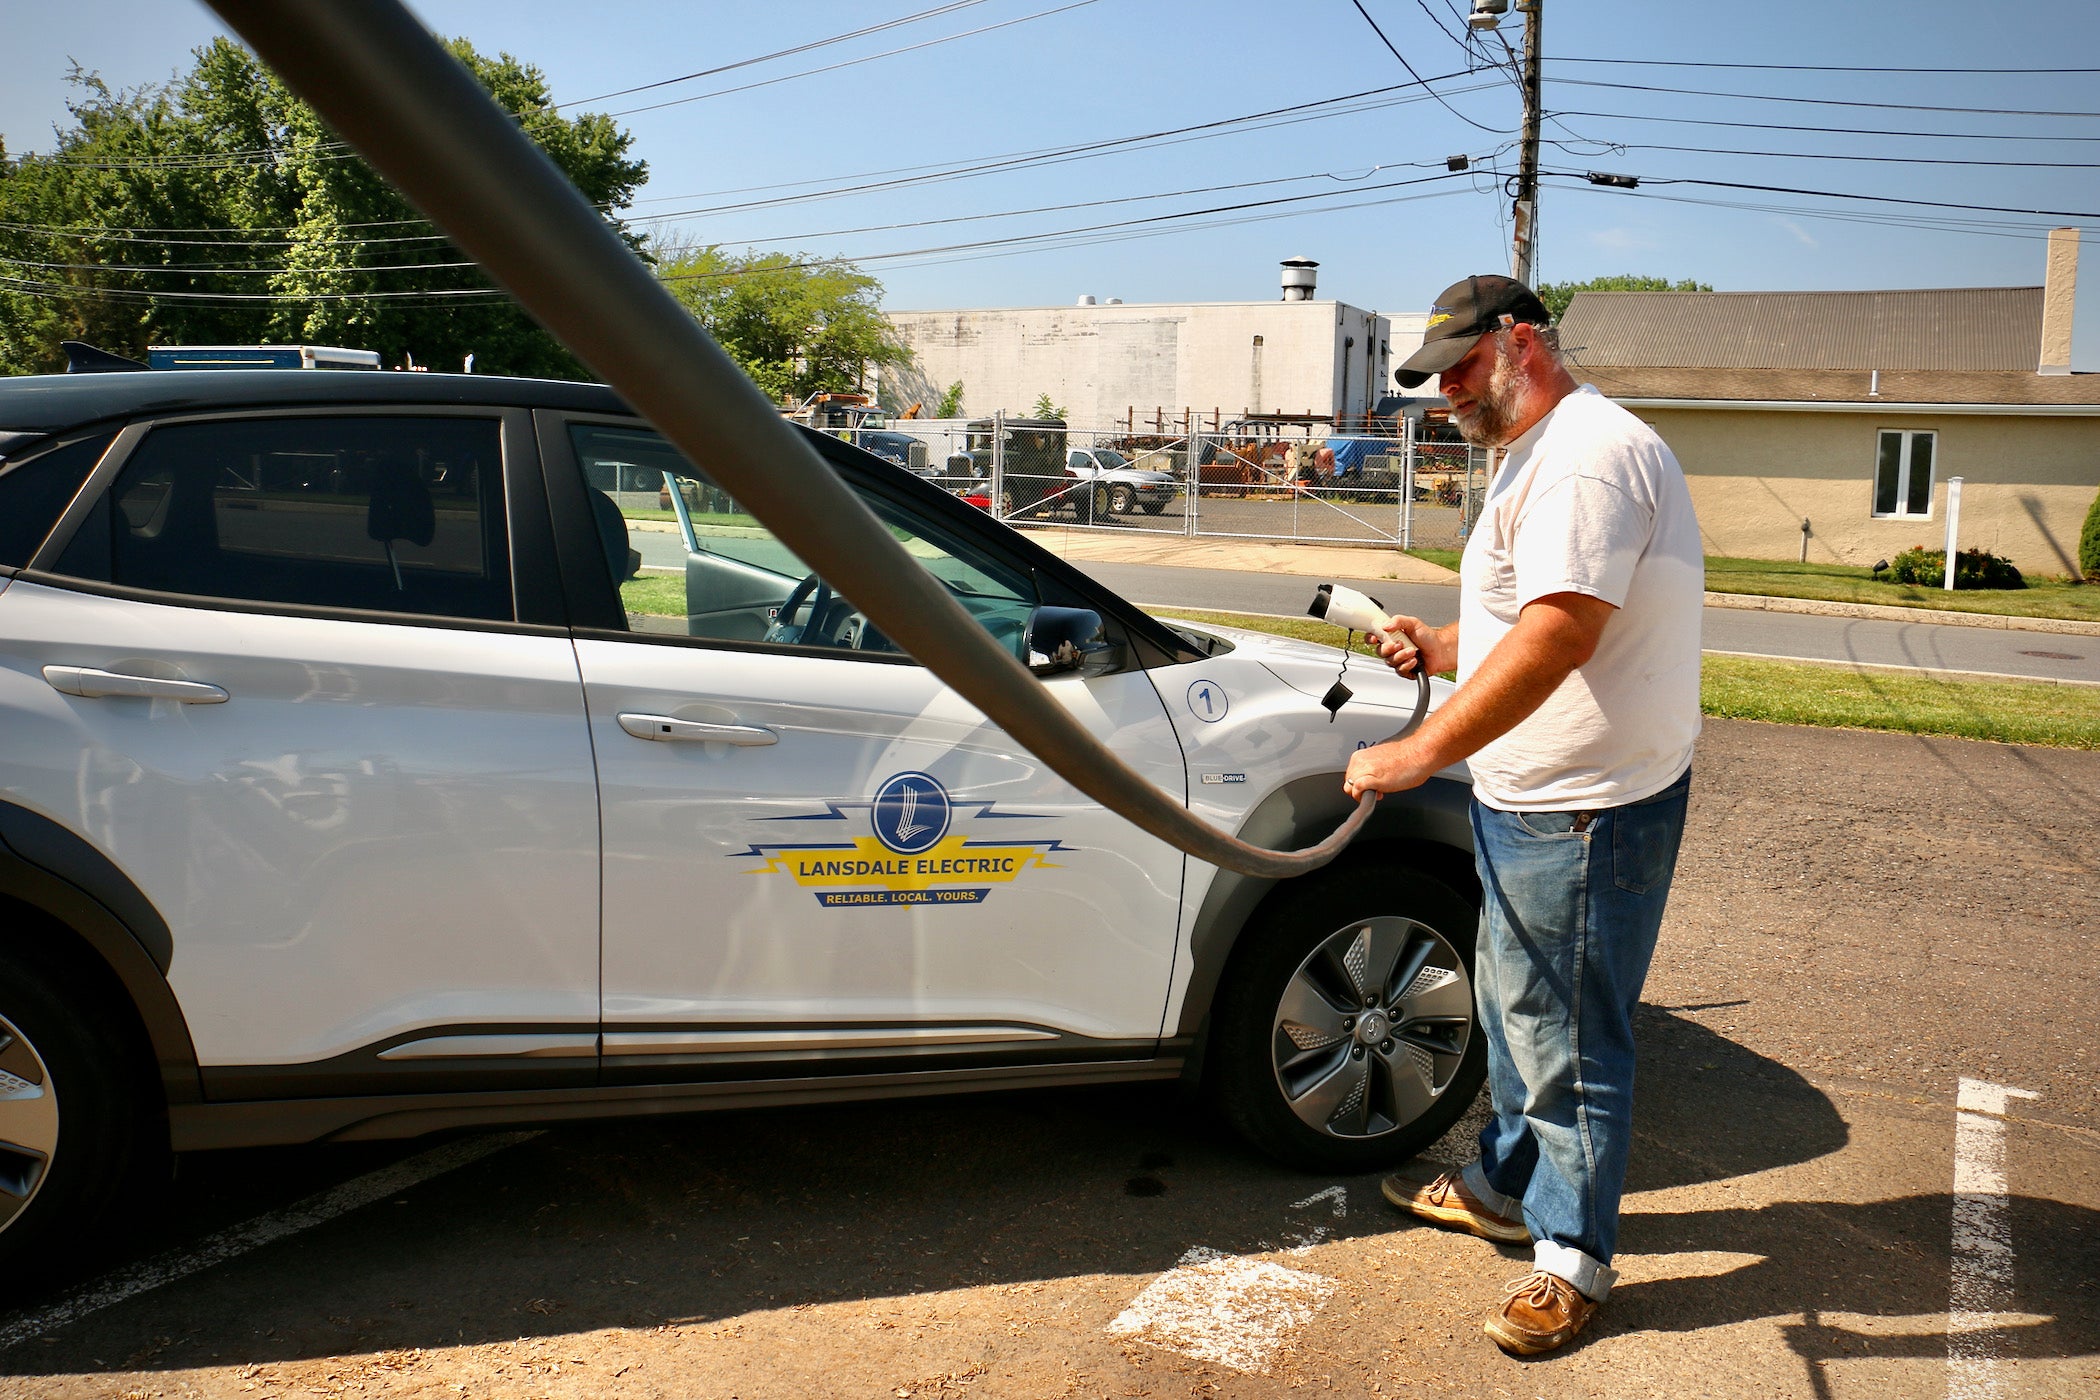 philly-s-suburban-municipalities-embrace-electric-vehicle-revolution